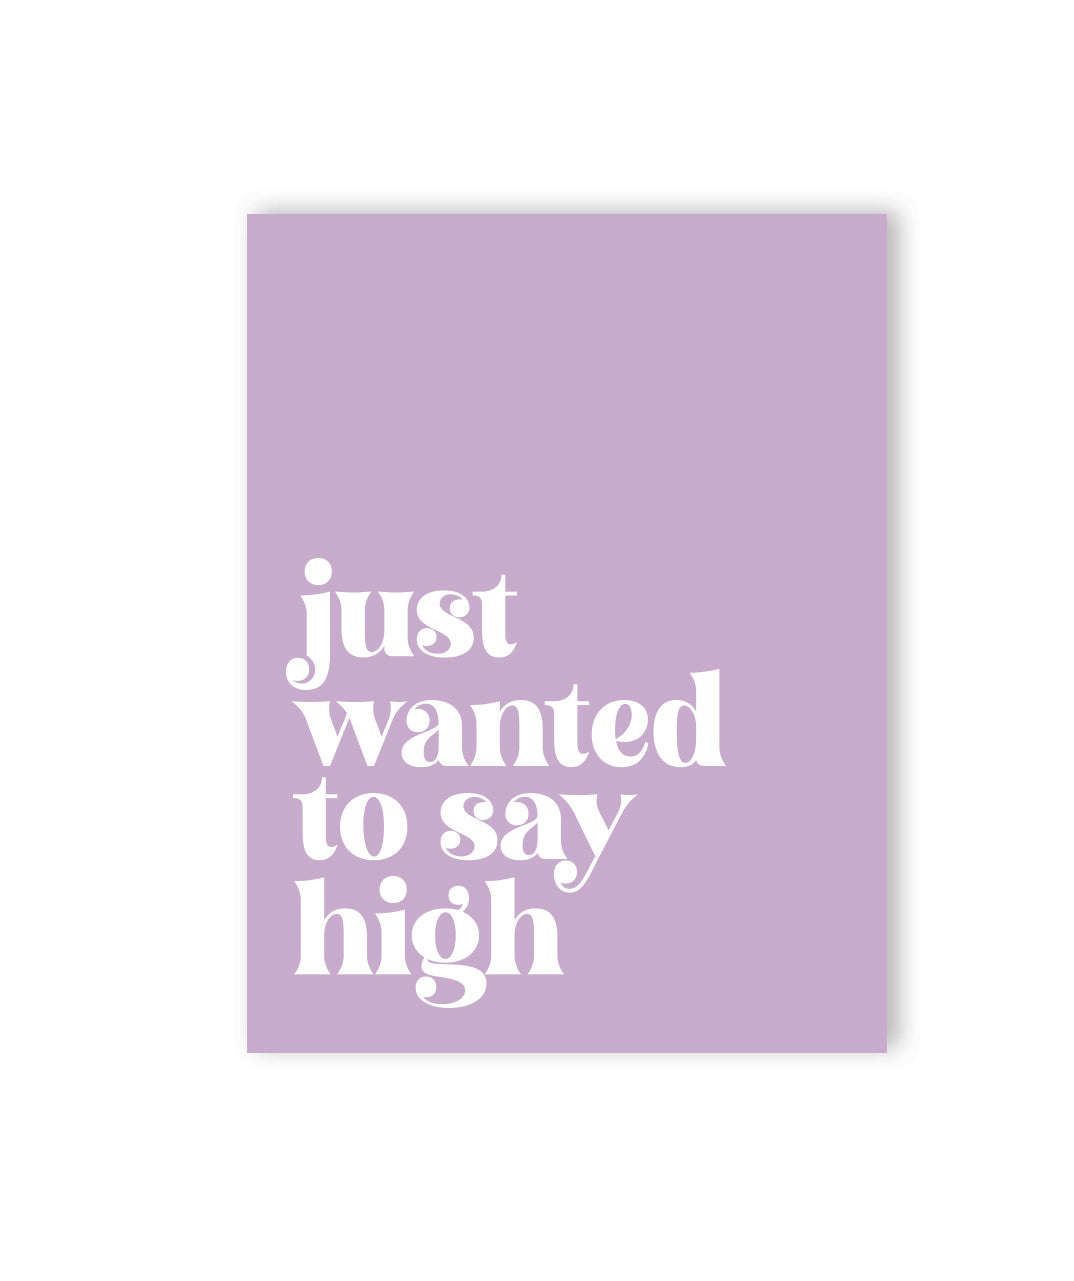 JUST WANTED TO SAY HIGH GREETING CARD WITH PURPLE BACKGROUND 